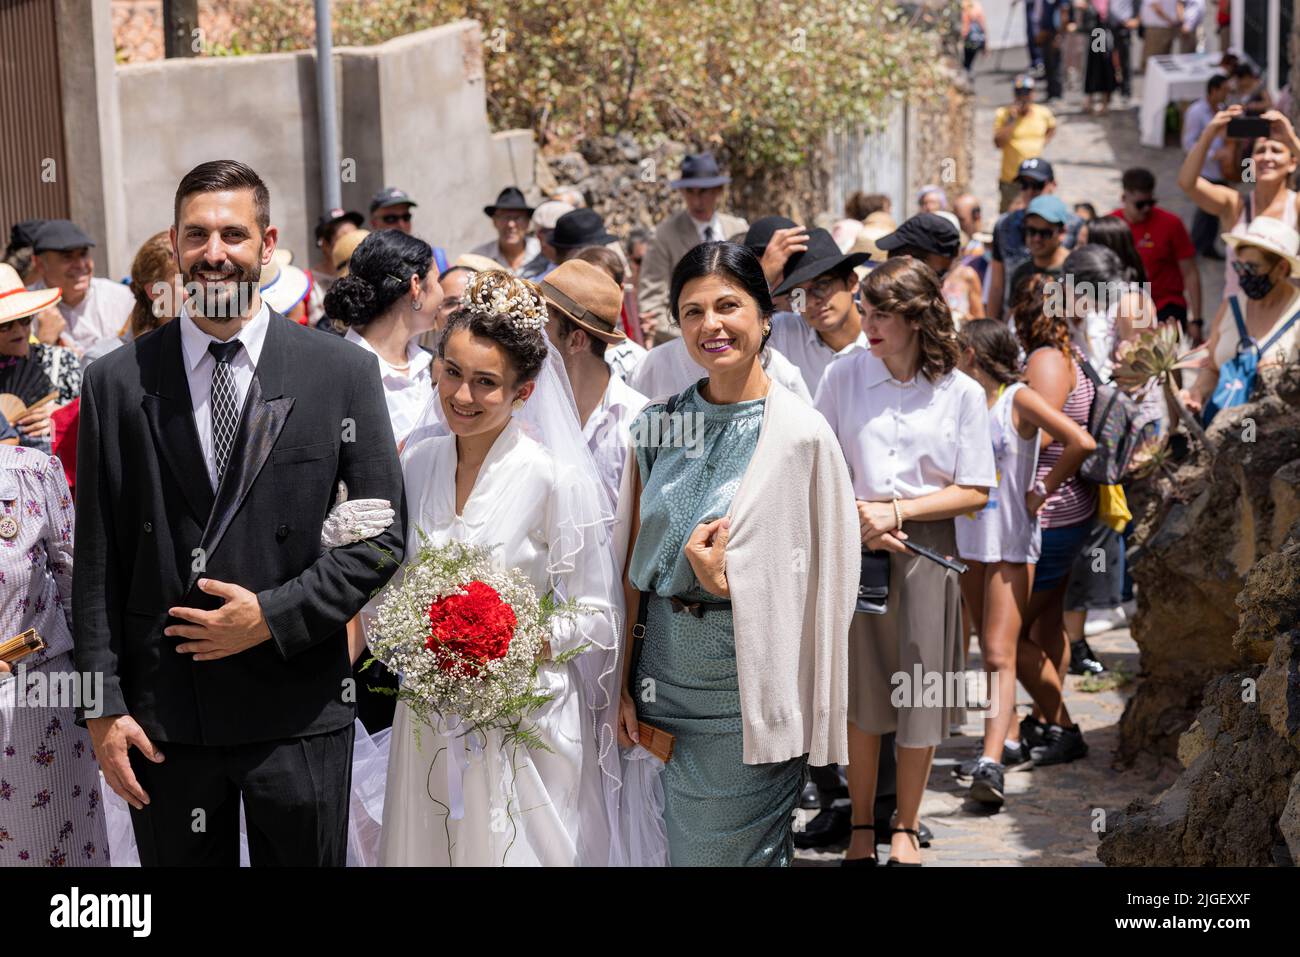 Chirche, Tenerife, 10 July 2022. A mock wedding is celebrated. Villagers celebrate the Día de tradiciones, Day of Traditions in the small mountain village where they renact scenes from the rural lifestyle lived by their ancestors in the 1940s Stock Photo